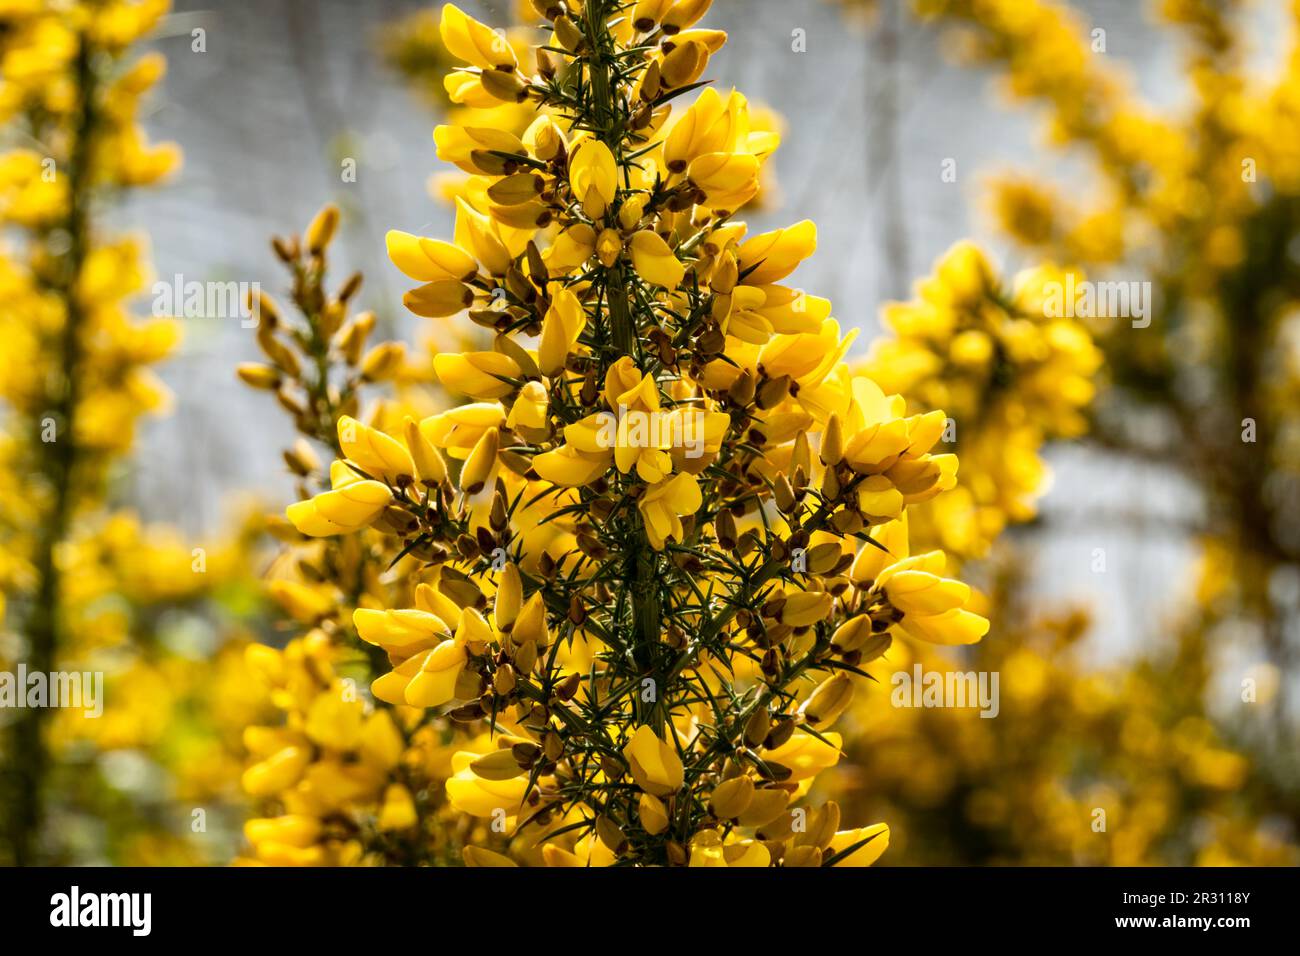 Common gorse, Ulex europaeus, close up of spiny shrub in bloom with yellow flowers in spring, Netherlands Stock Photo